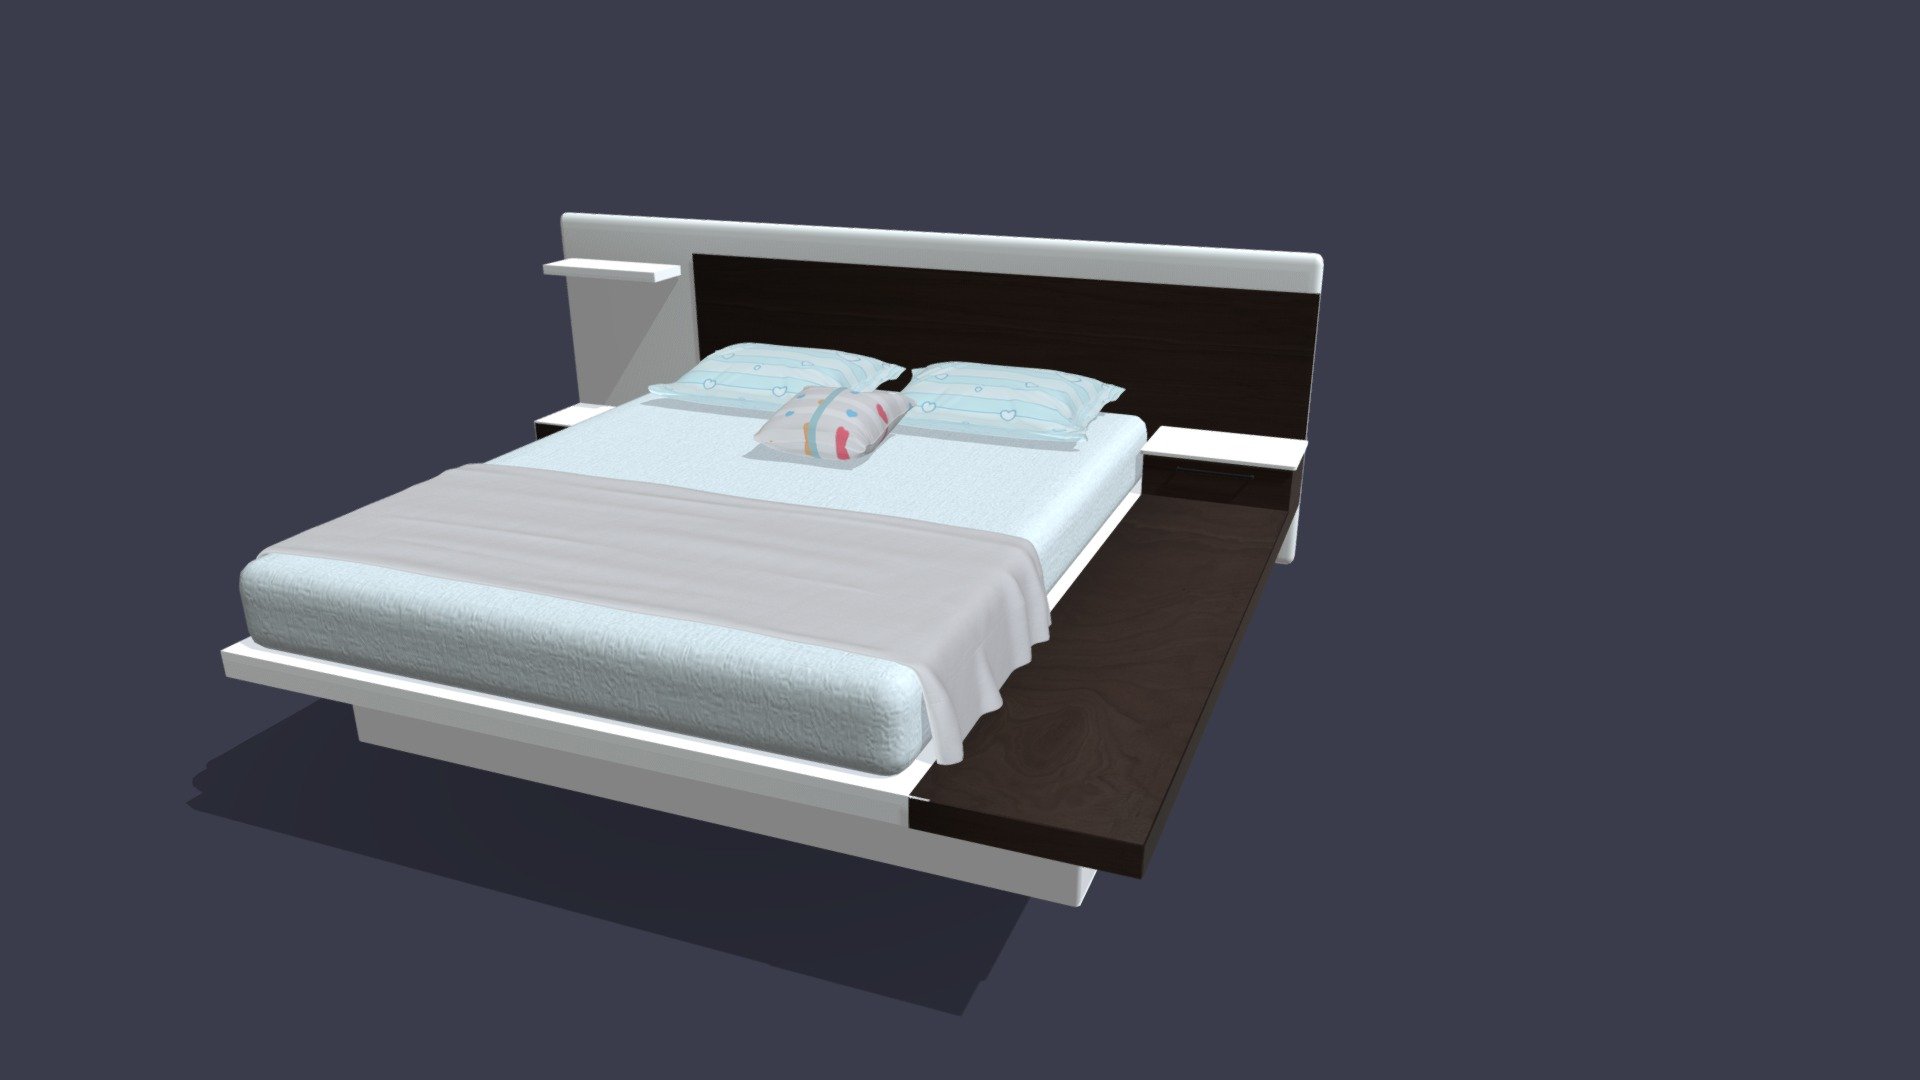 BED 03 WITH PBR MATERIALS
AVAILABLE FILE FORMATS


- 3DS MAX          (.MAX)      VERSION- 2014

- MAYA            (.MA , .MB) VERSION- 2014

- CINEMA 4D        (.C4D)    VERSION- R19

- BLENDER          (.BLEND)    VERSION- 2.9

- SKETCHUP        (.SKP)        VERSION- 2017

- FBX         (.FBX)

- OBJ         (.OBJ)

- COLLADA      (.DAE)

- 3DS         (.3DS)

   YOU CAN ALSO IMPORT IN MAJOR 3D SOFTWARES WHICH SUPPORT FBX,OBJ,3DS,DAE FORMATS





NOTES        :-





CREATED WITH 3DS MAX SOFTWARES WITHOUT ANY PLUGINS




NO ADDITIONAL PLUGINS UDED IN ANY SOFTWARE 




PBR TEXTURES USED




20+ PBR BONUS TEXTURES INCLUDED WITH THIS FILE THEREFORE YOU CAN CHANGE THE TEXTURES




SOME CHANGES MAY BE NEEDED IN MATERIALS VALUE ASPER YOUR RENDER PLUGIN




 - BED 03 - Buy Royalty Free 3D model by jasirkt 3d model